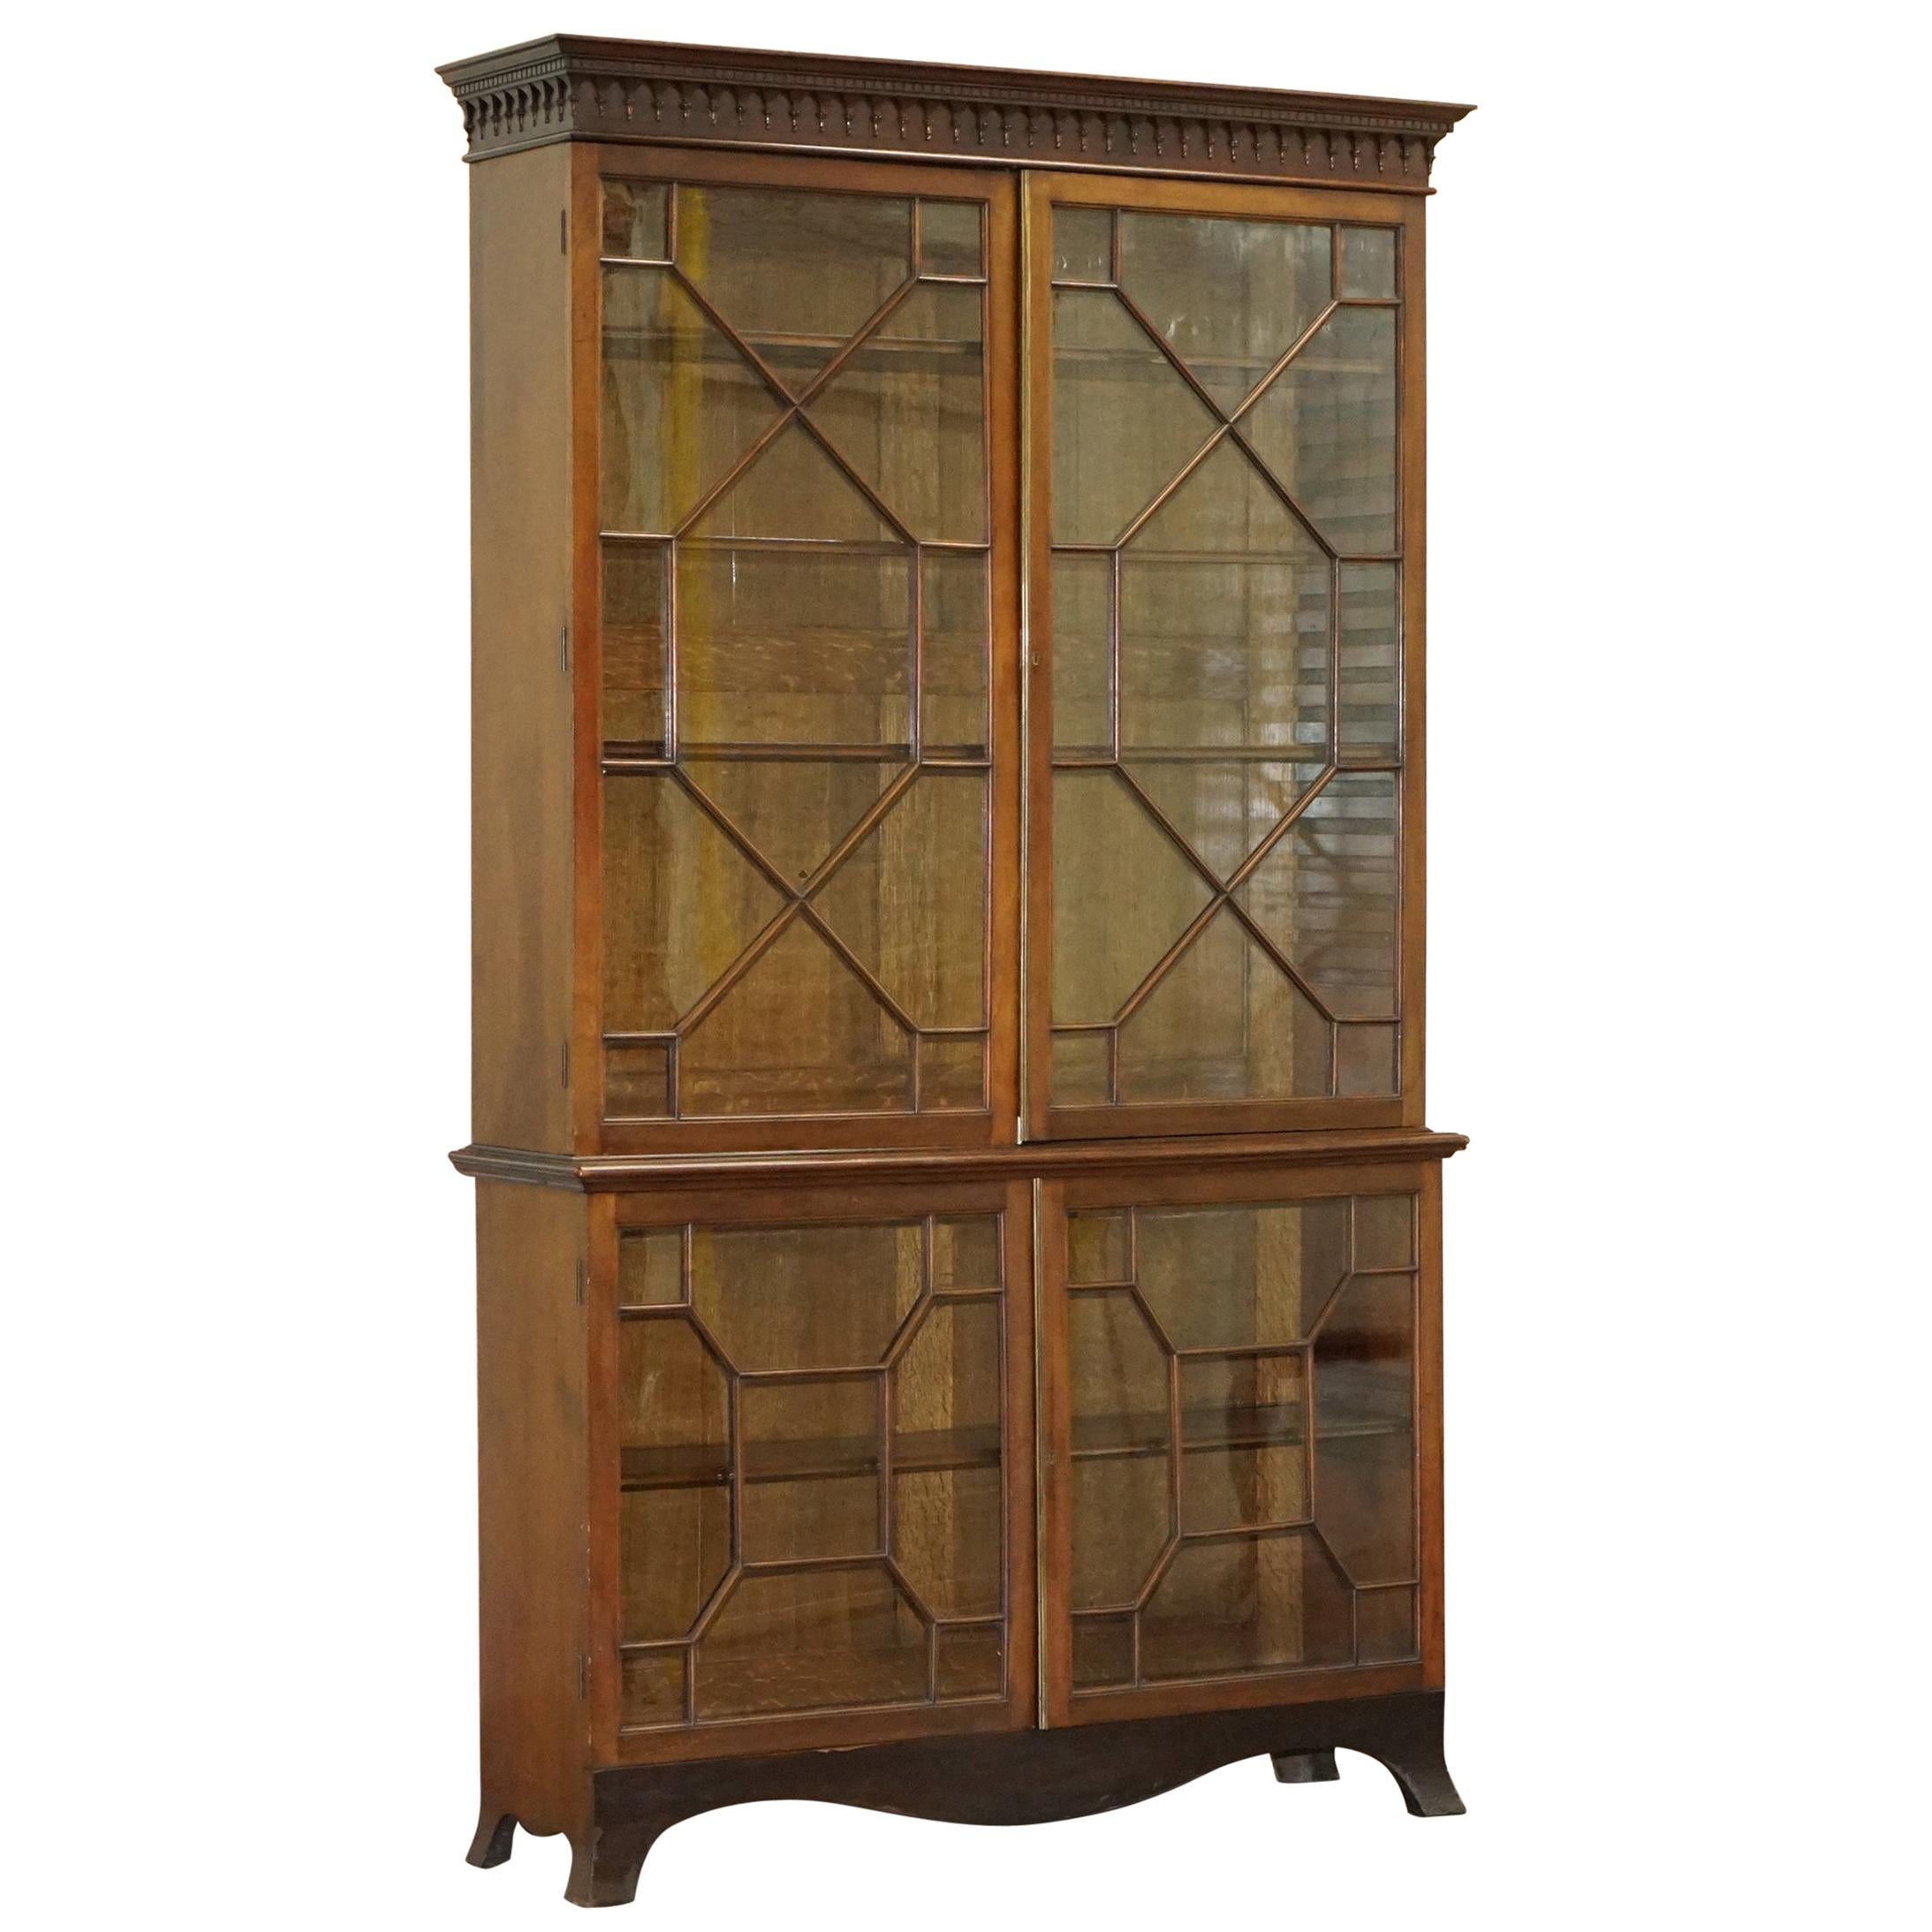 Solid Mahogany Astral Water Glazed Victorian Library Bookcase, circa 1840